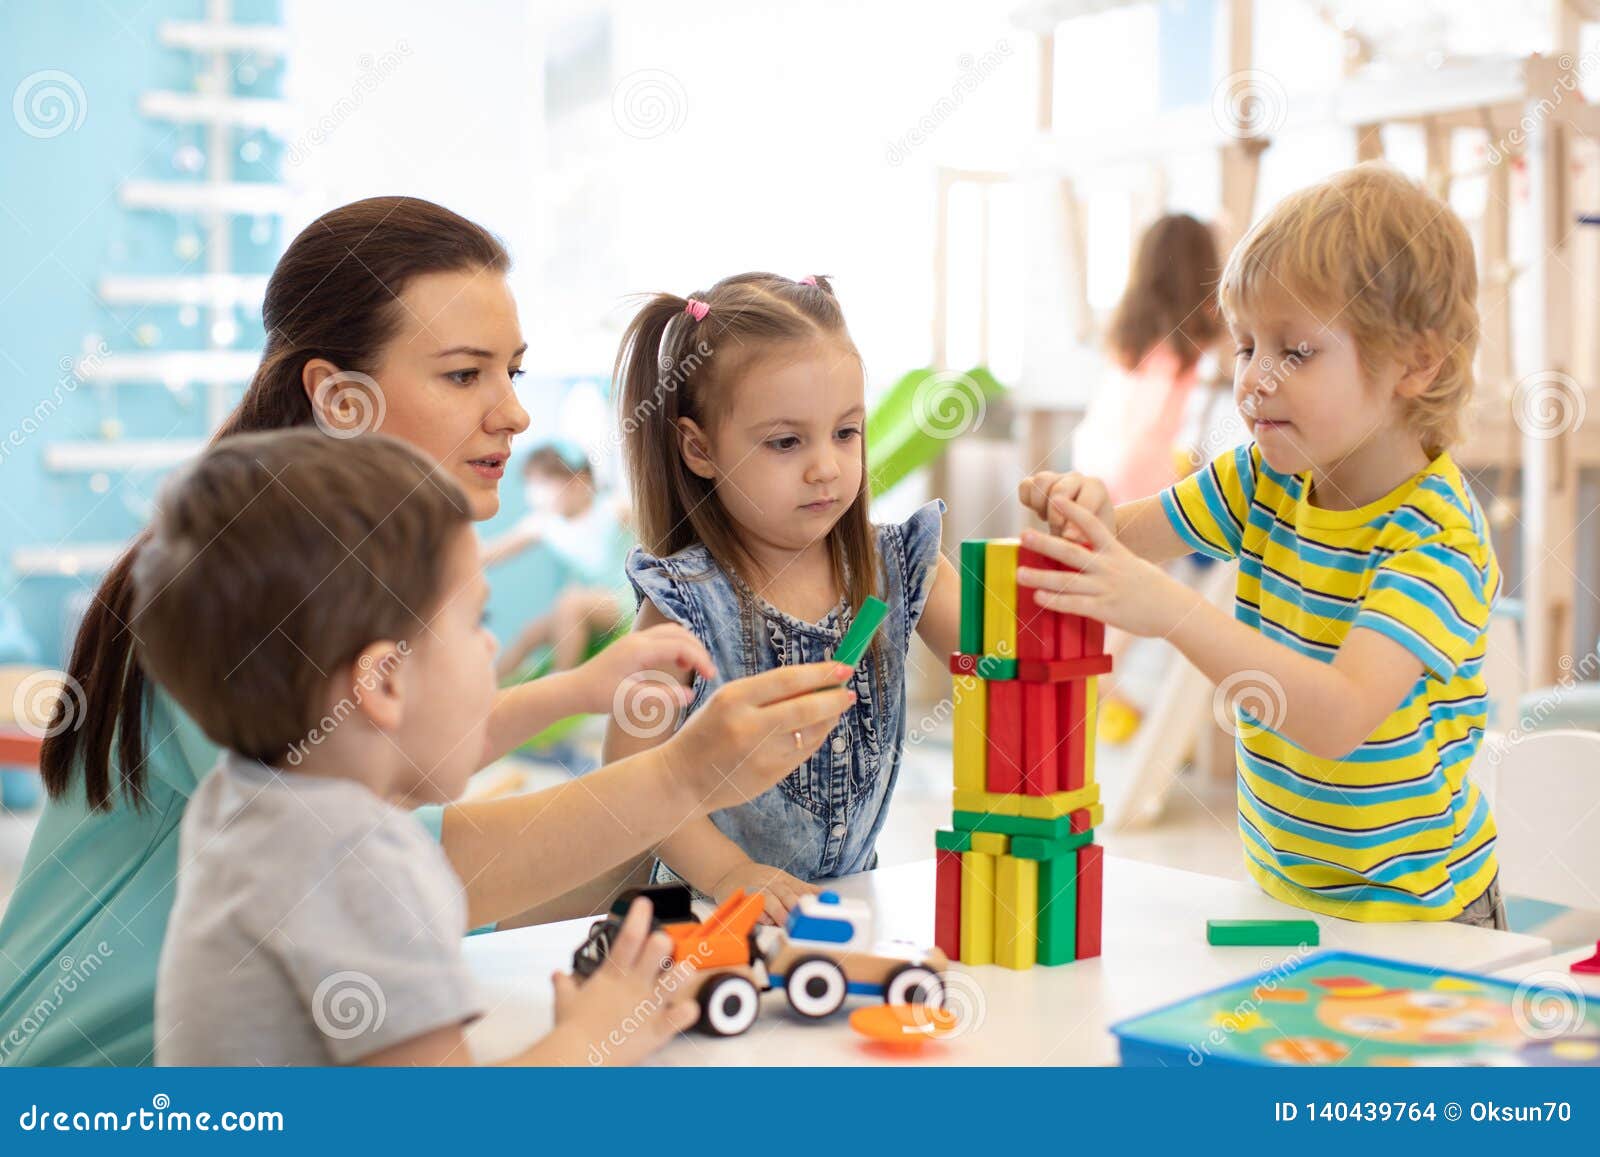 little kids build block toys at home or daycare. kids playing with color blocks. educational toys for preschool and kindergarten